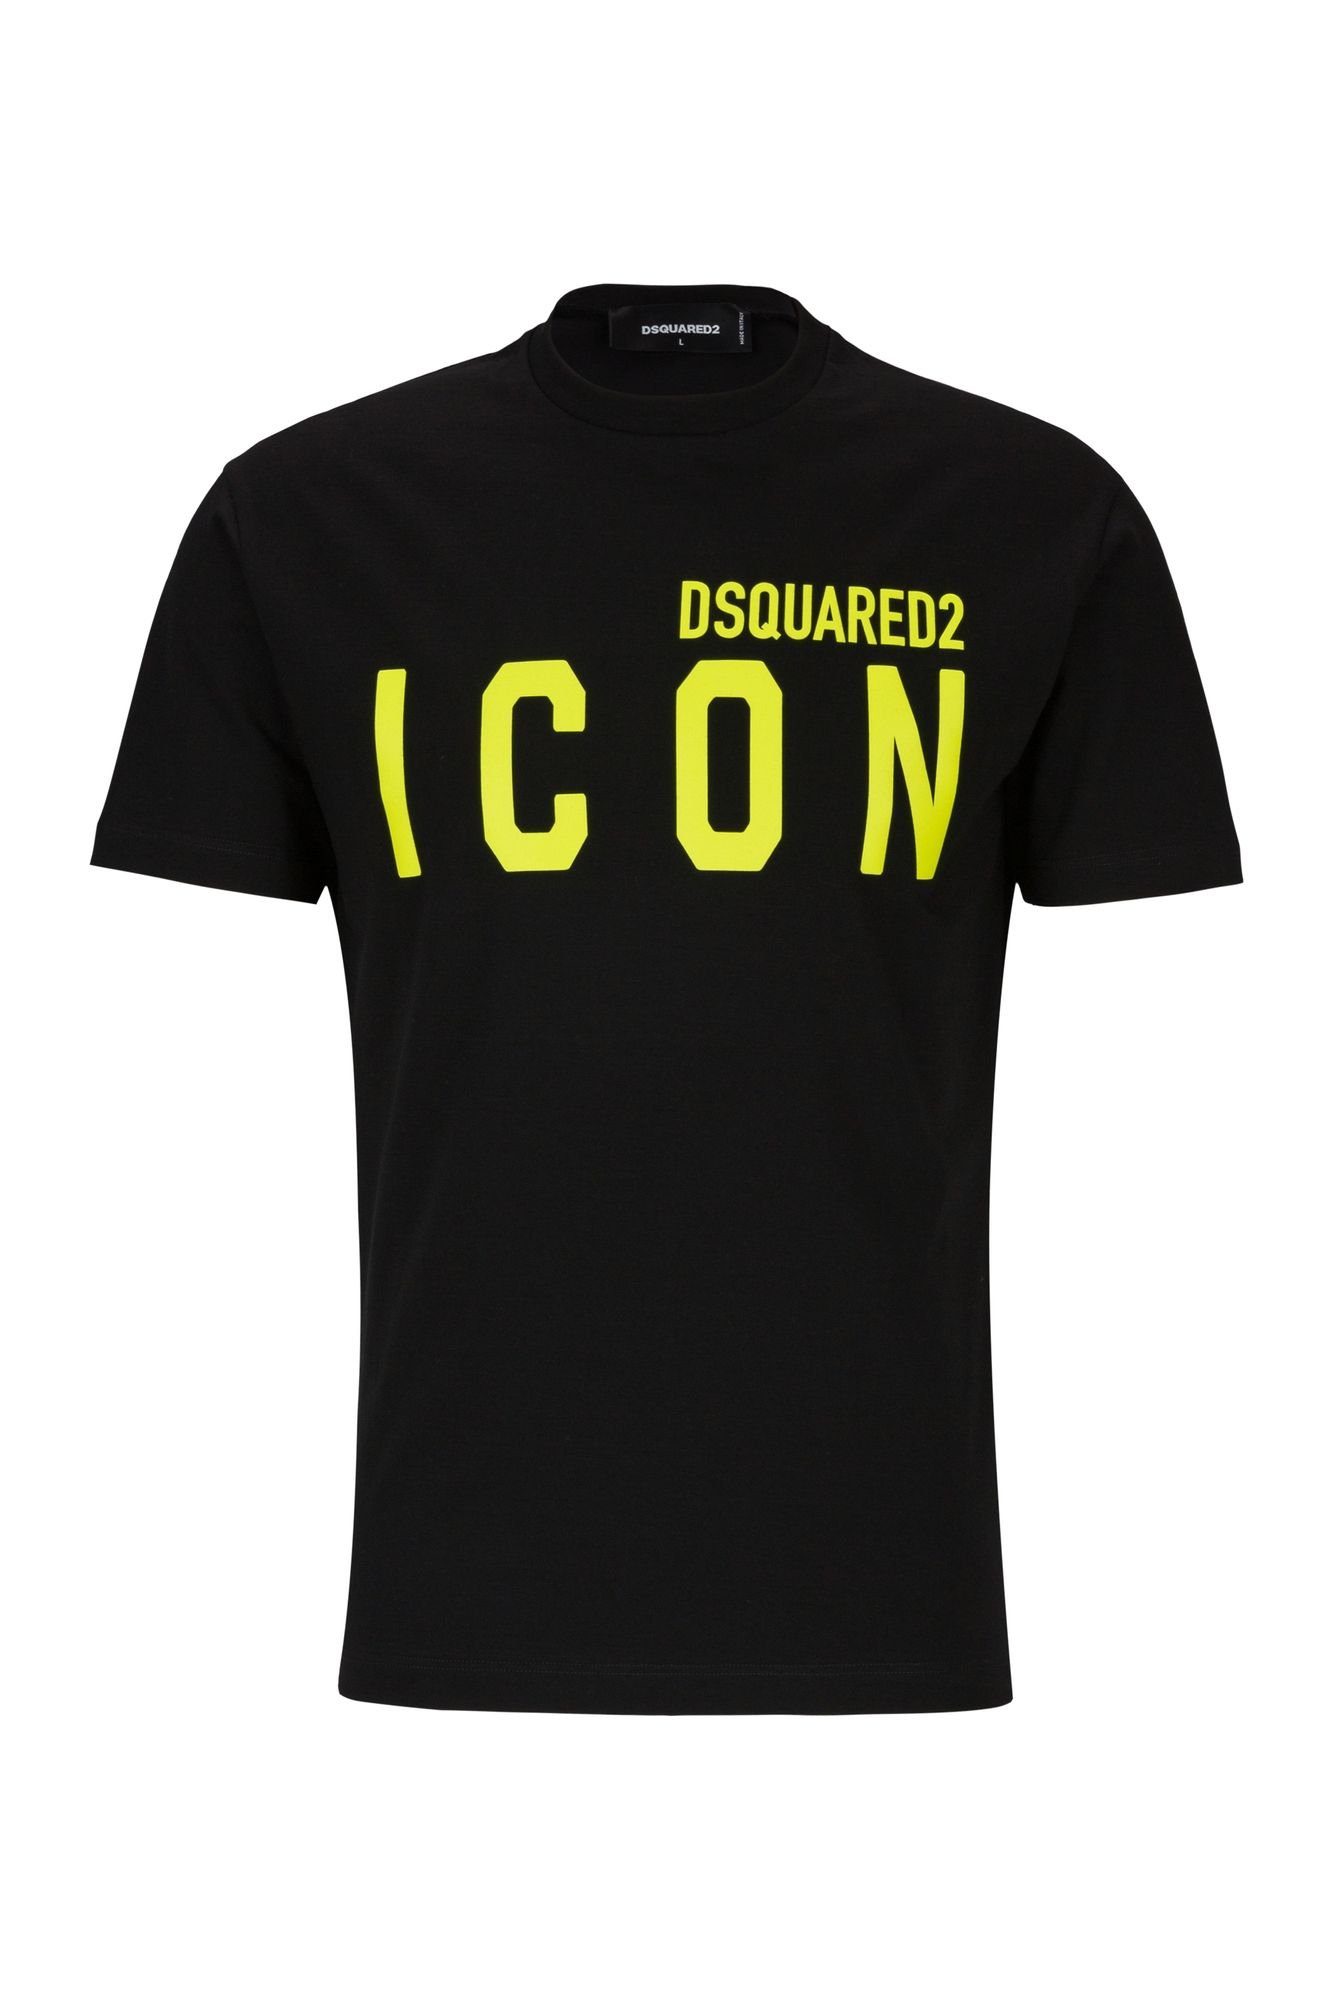 Dsquared2 T-Shirt Dsquared ICON Neon Green